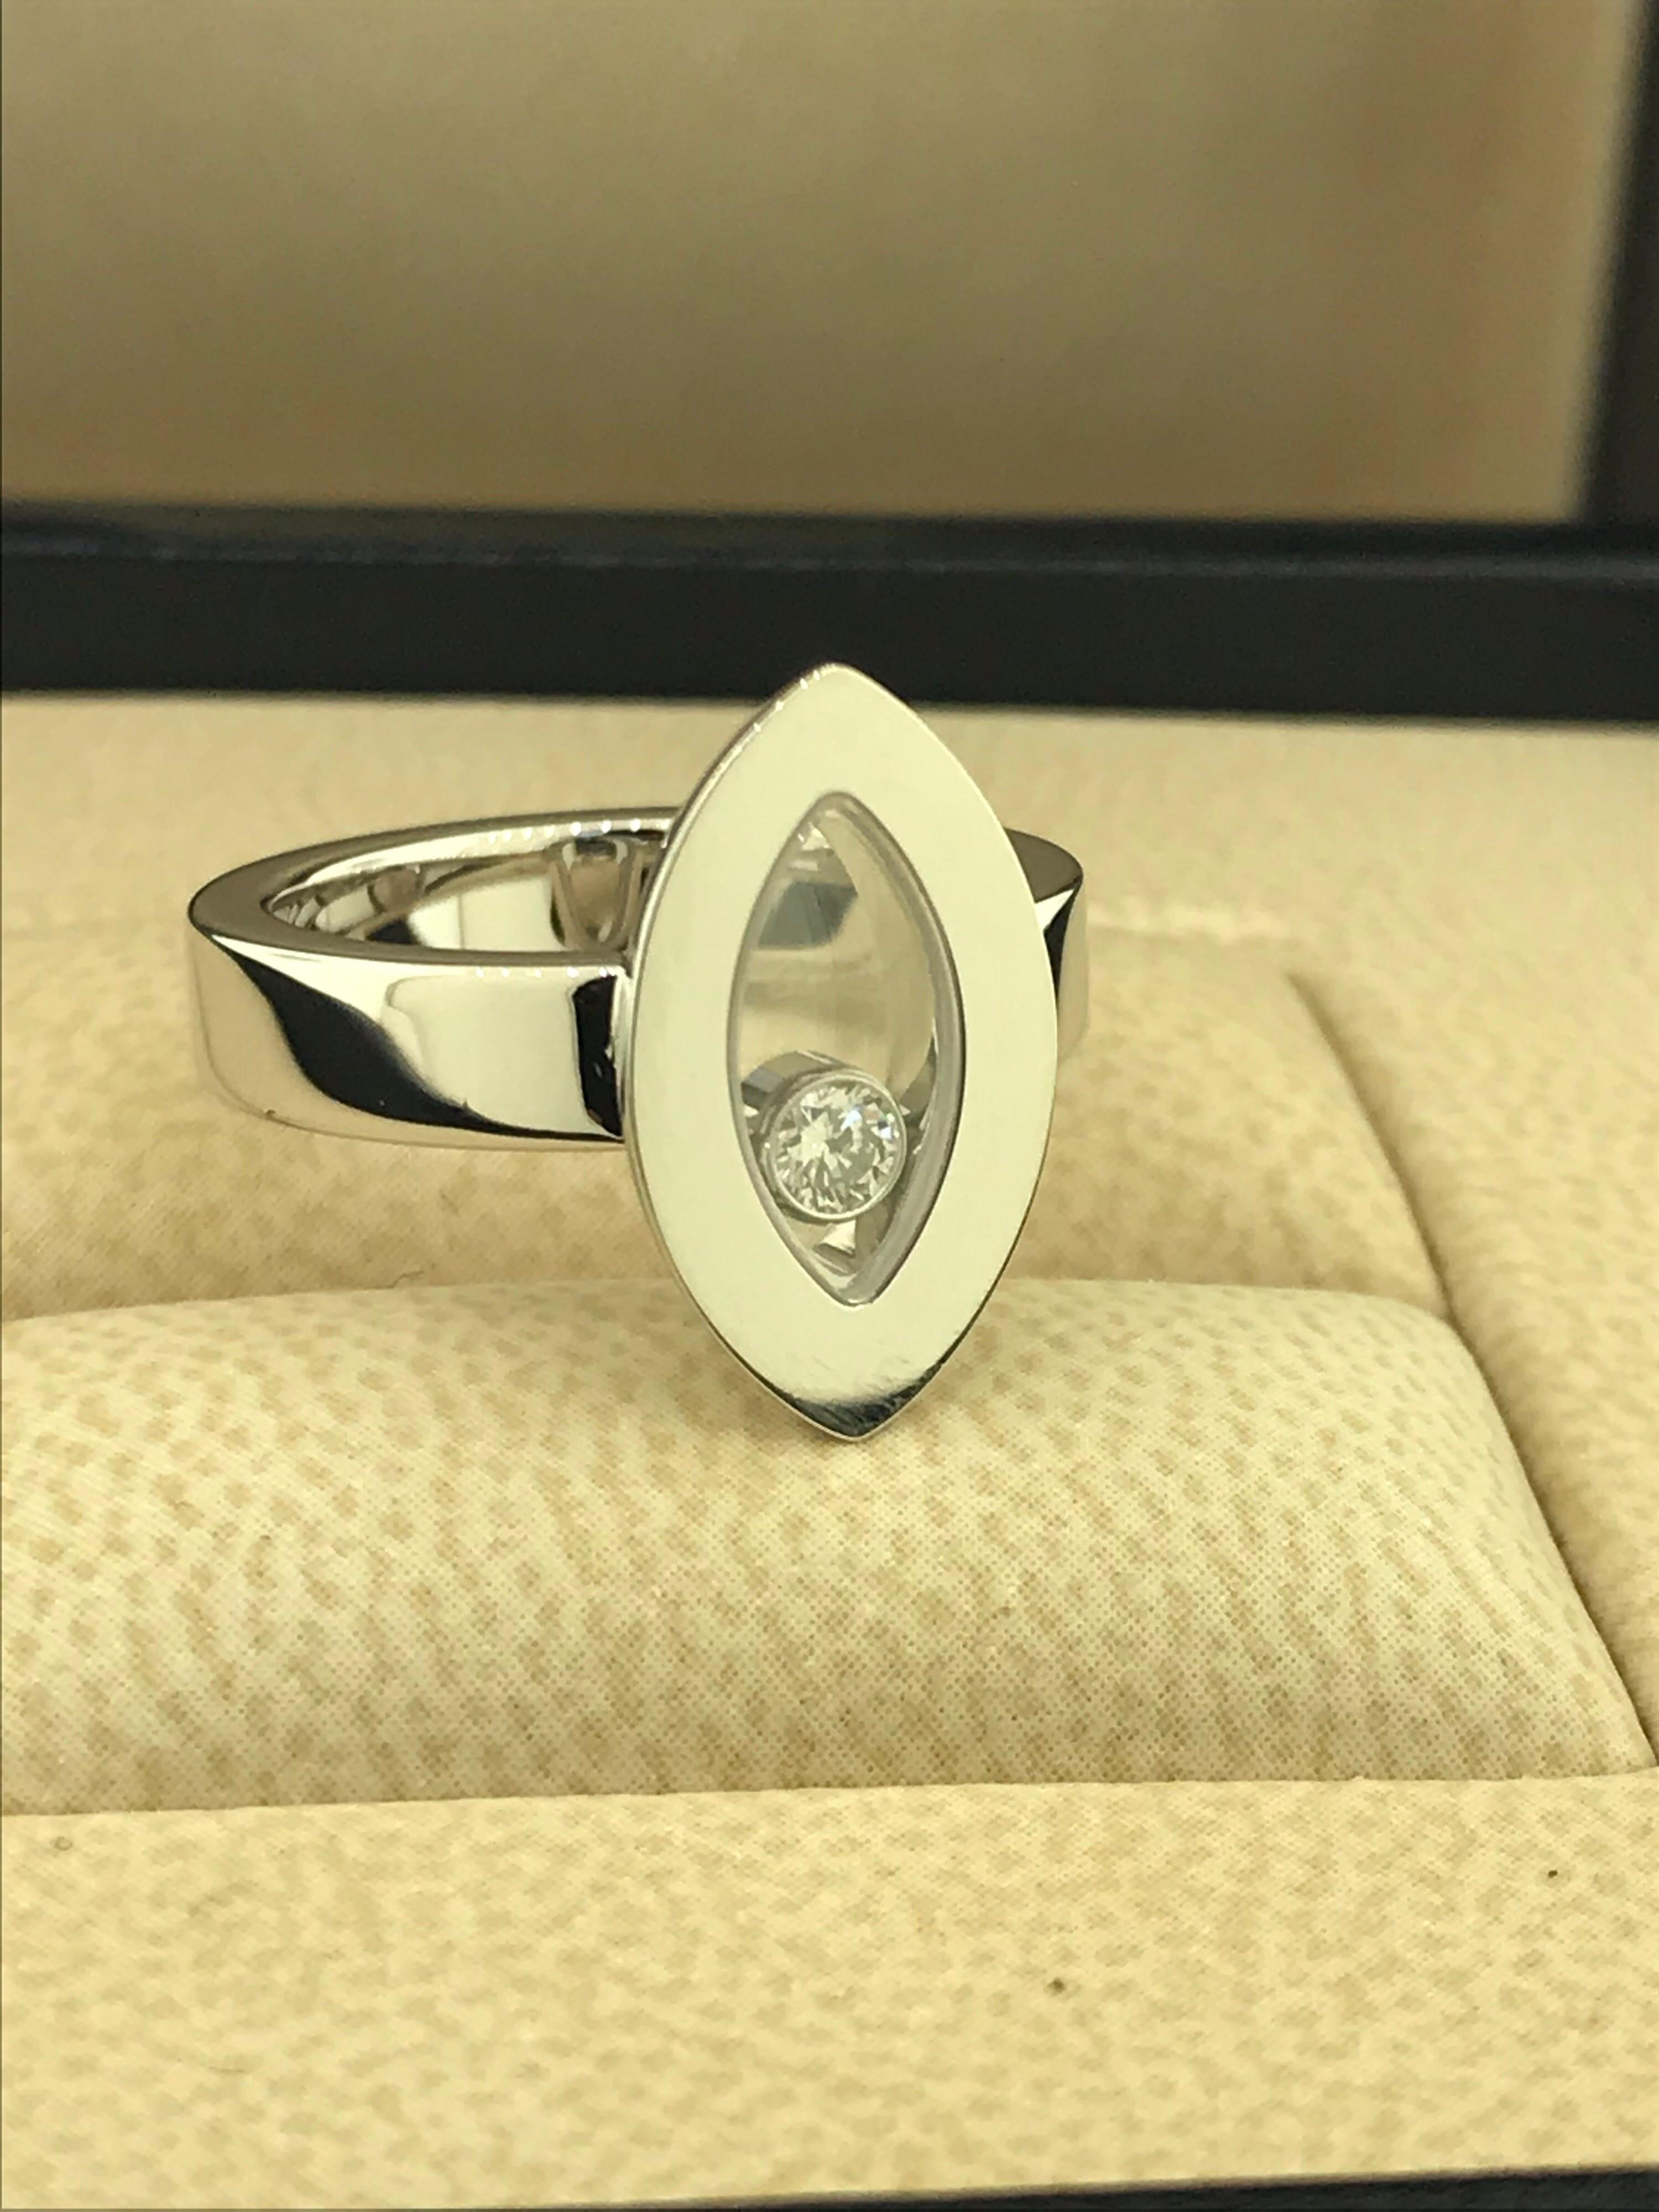 Chopard Happy Diamonds Tear Drop Shaped Ring

Model Number: 82/5715-1107

100% Authentic

Brand New

Comes with original Chopard Box, Certificate of Authenticity and Warranty, and Jewels Manual

18 Karat White Gold 

Ring Weight: 10.3gr

Size 5.25